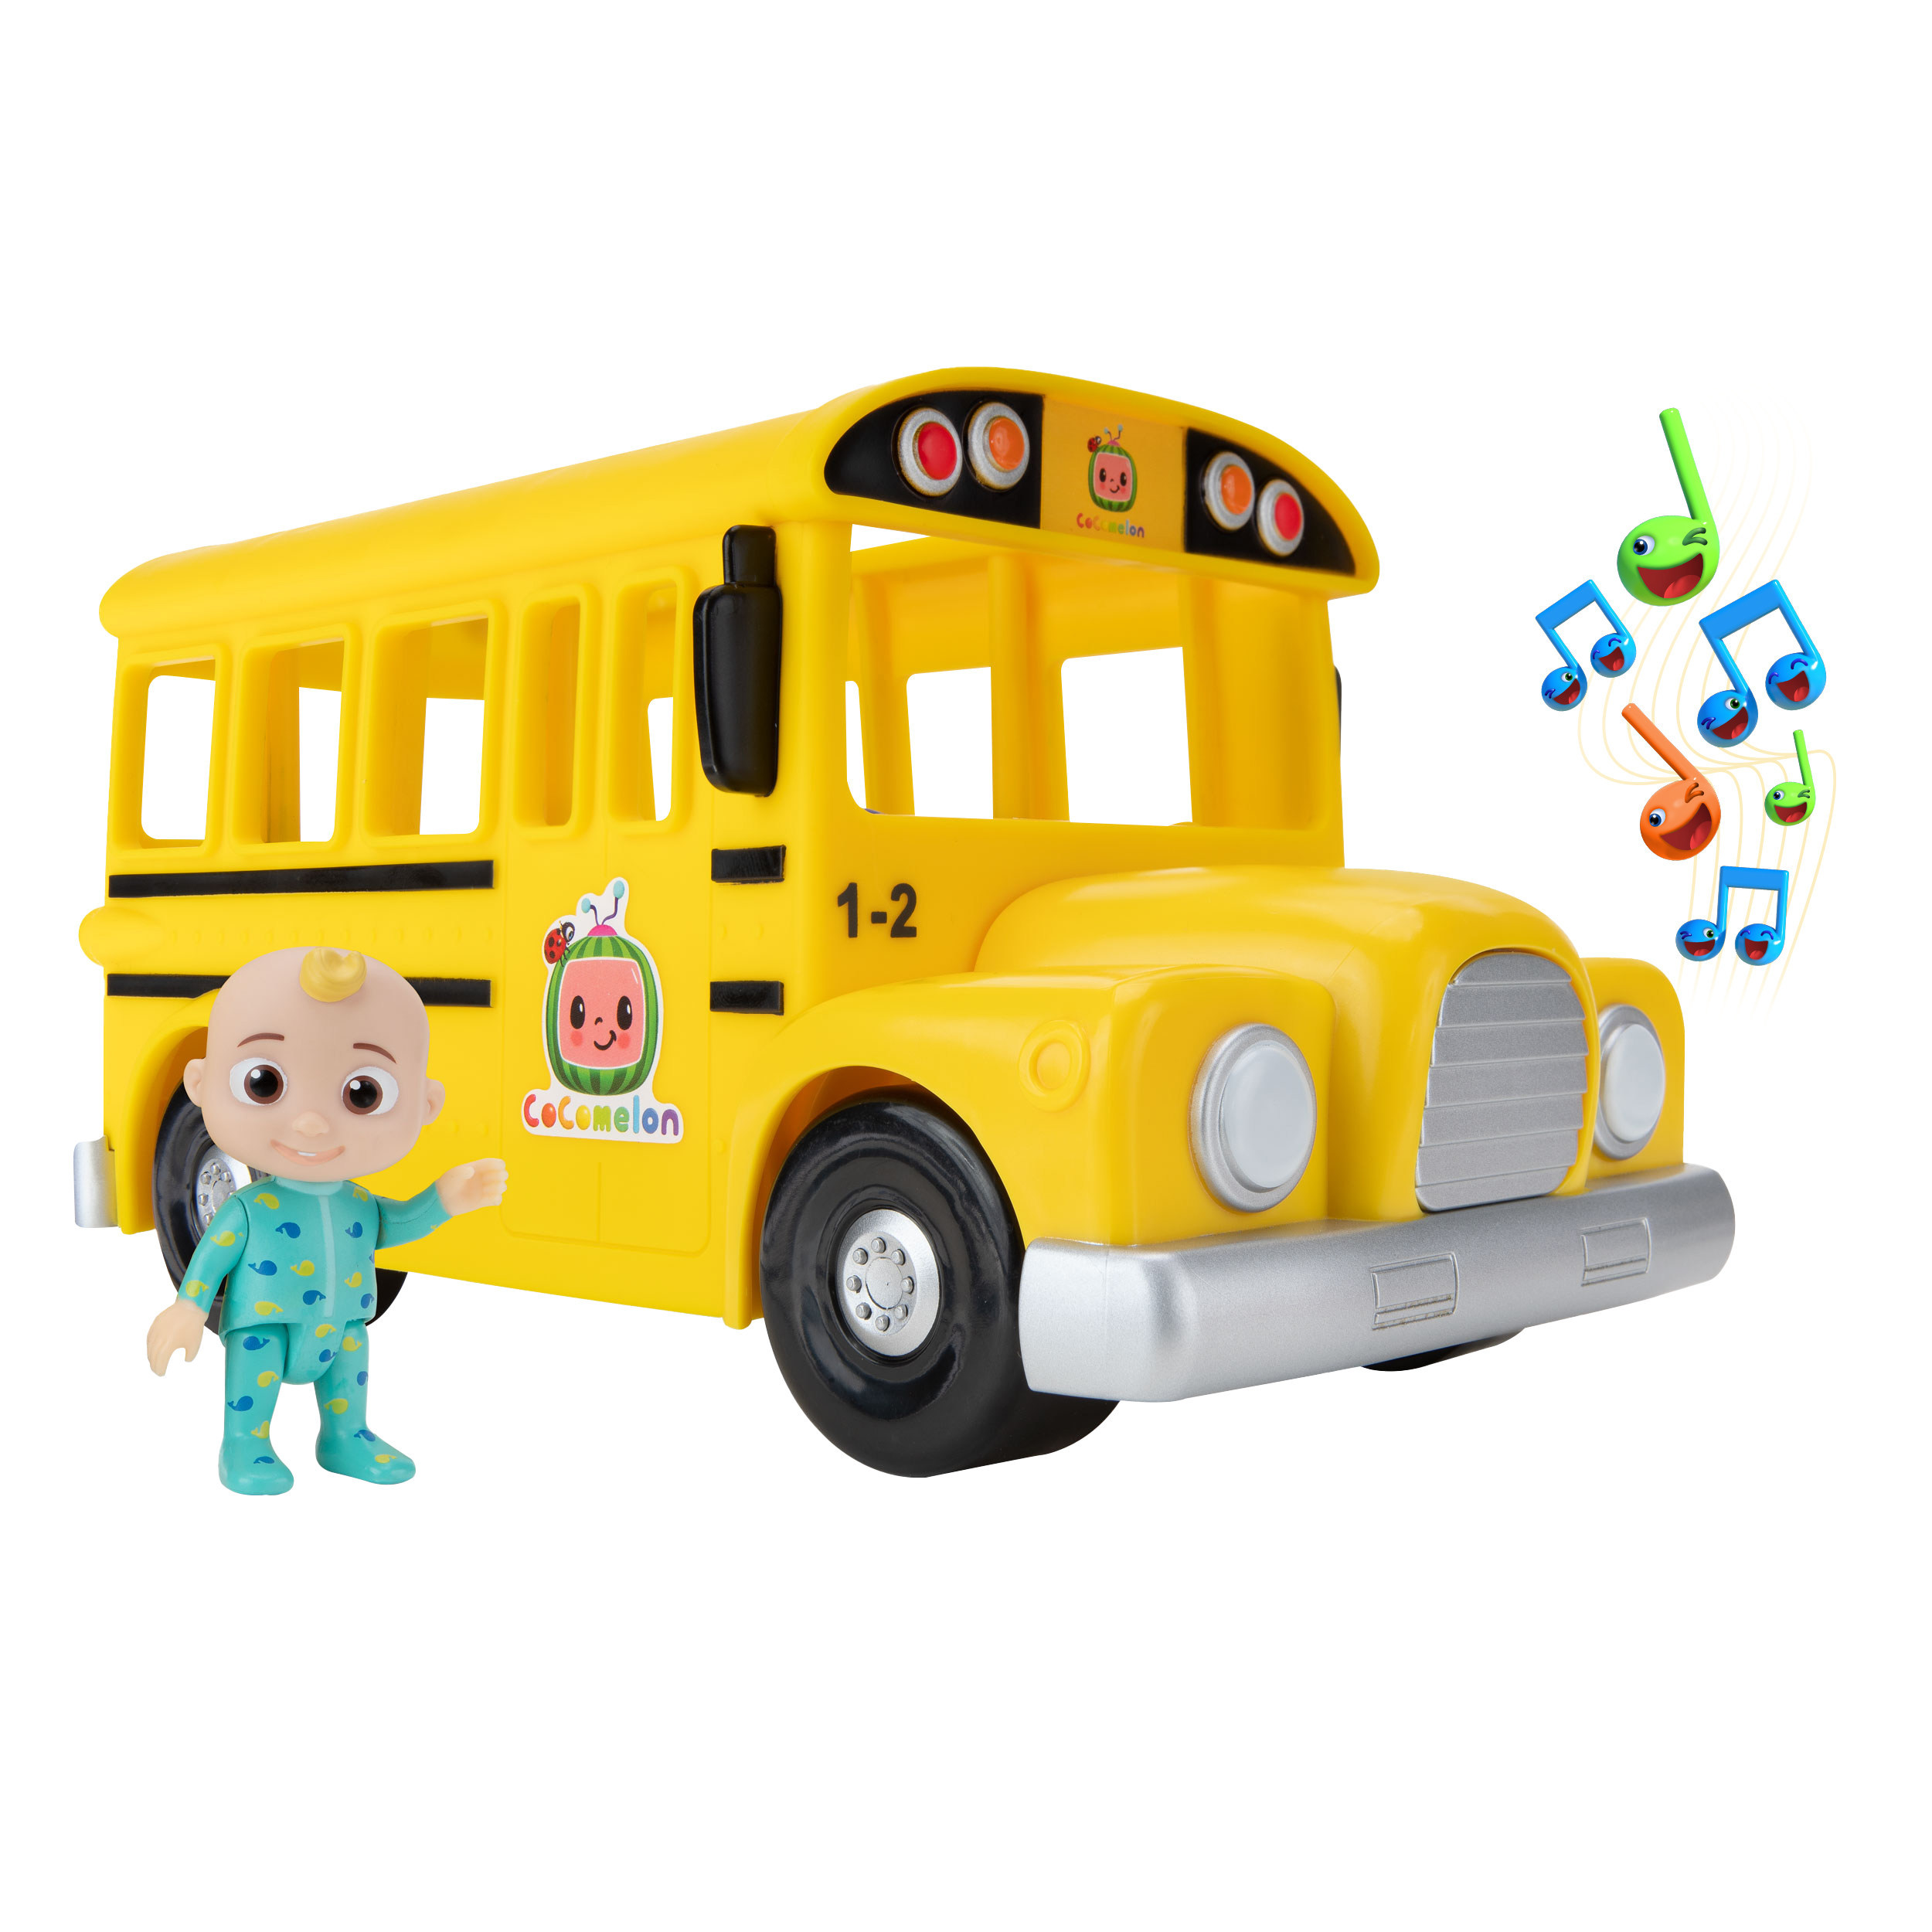 Jazwares Debuts First Toy Line For Cocomelon The 1 Youtube Channel For Kids And Preschoolers - kpop is trash roblox